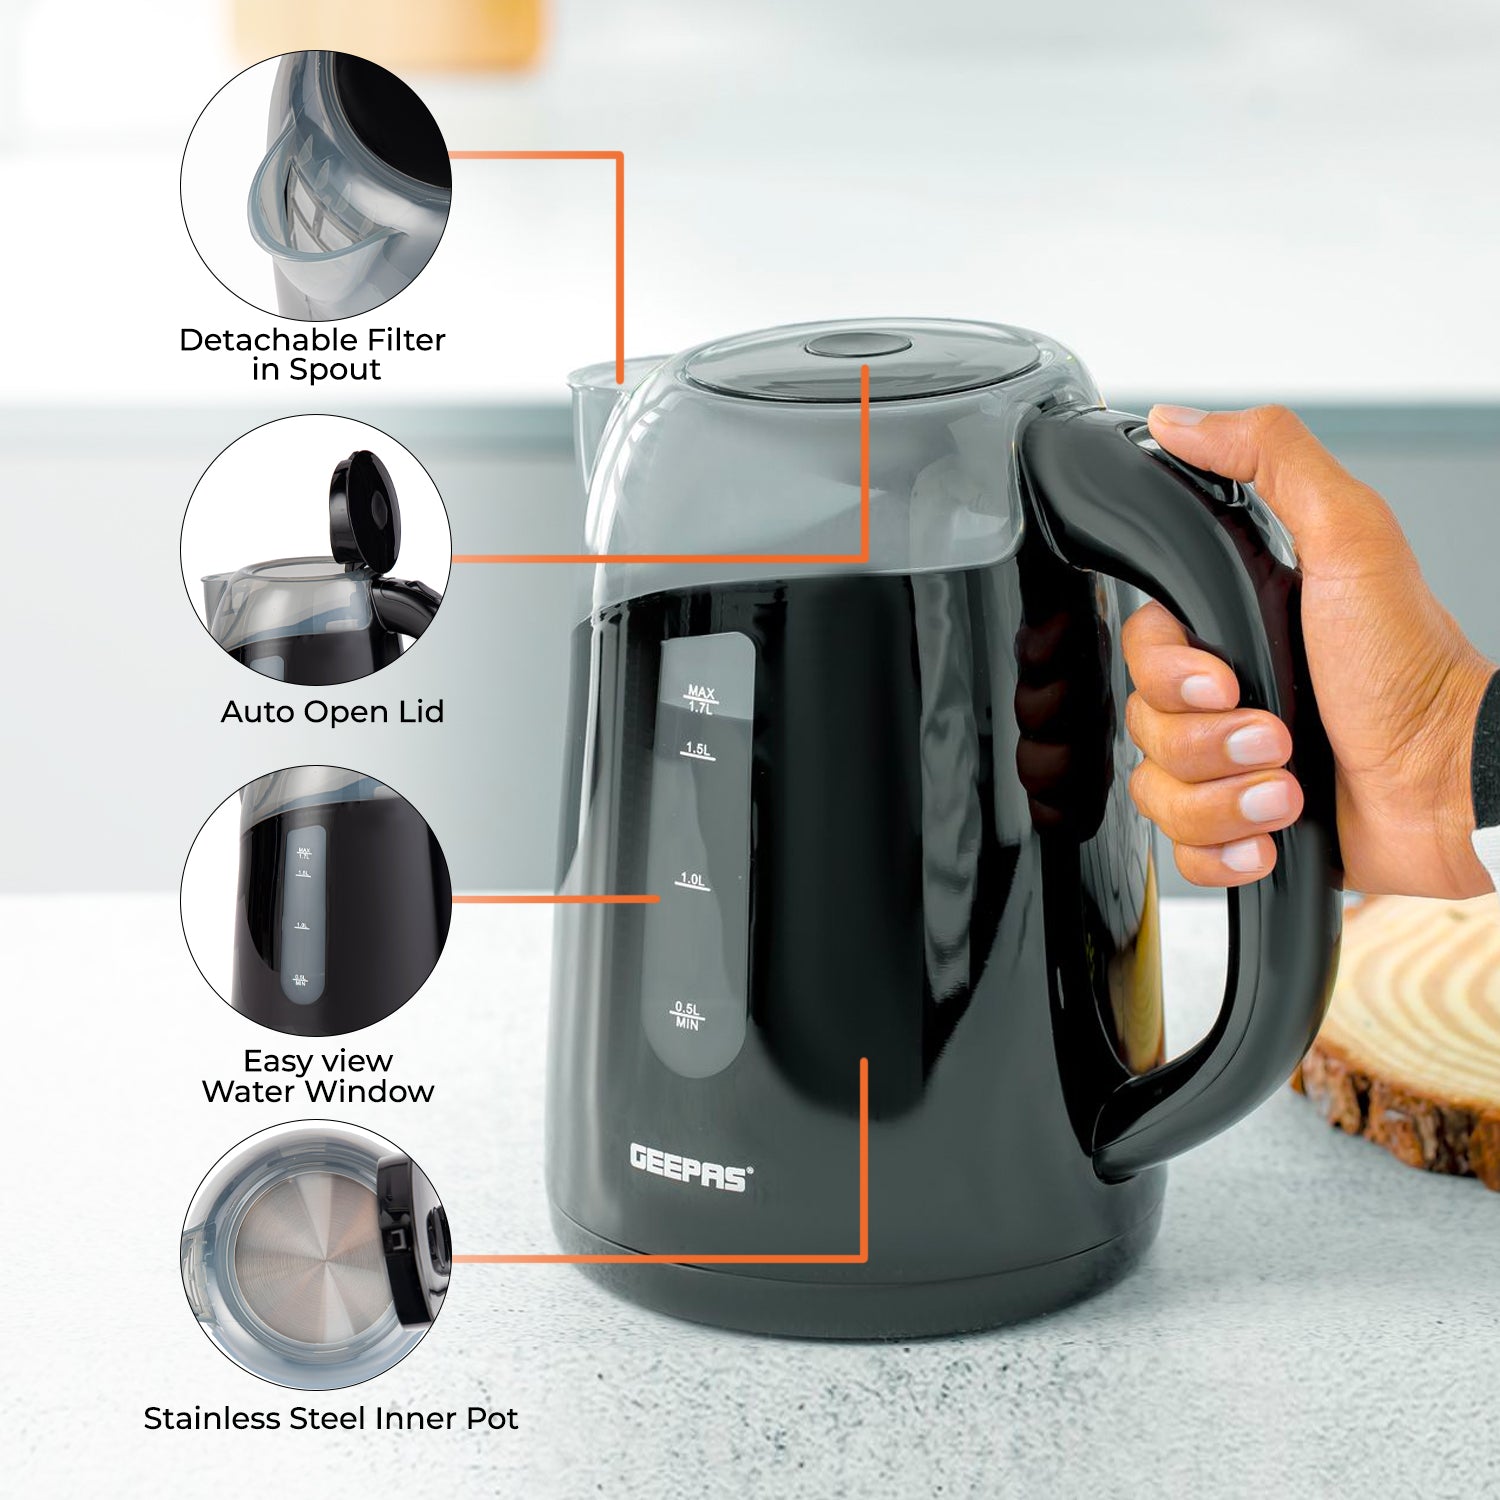 BLACK+DECKER™ 1.7L Rapid Boil Electric Kettle, Boils up to 7 Cups of Water,  Gray